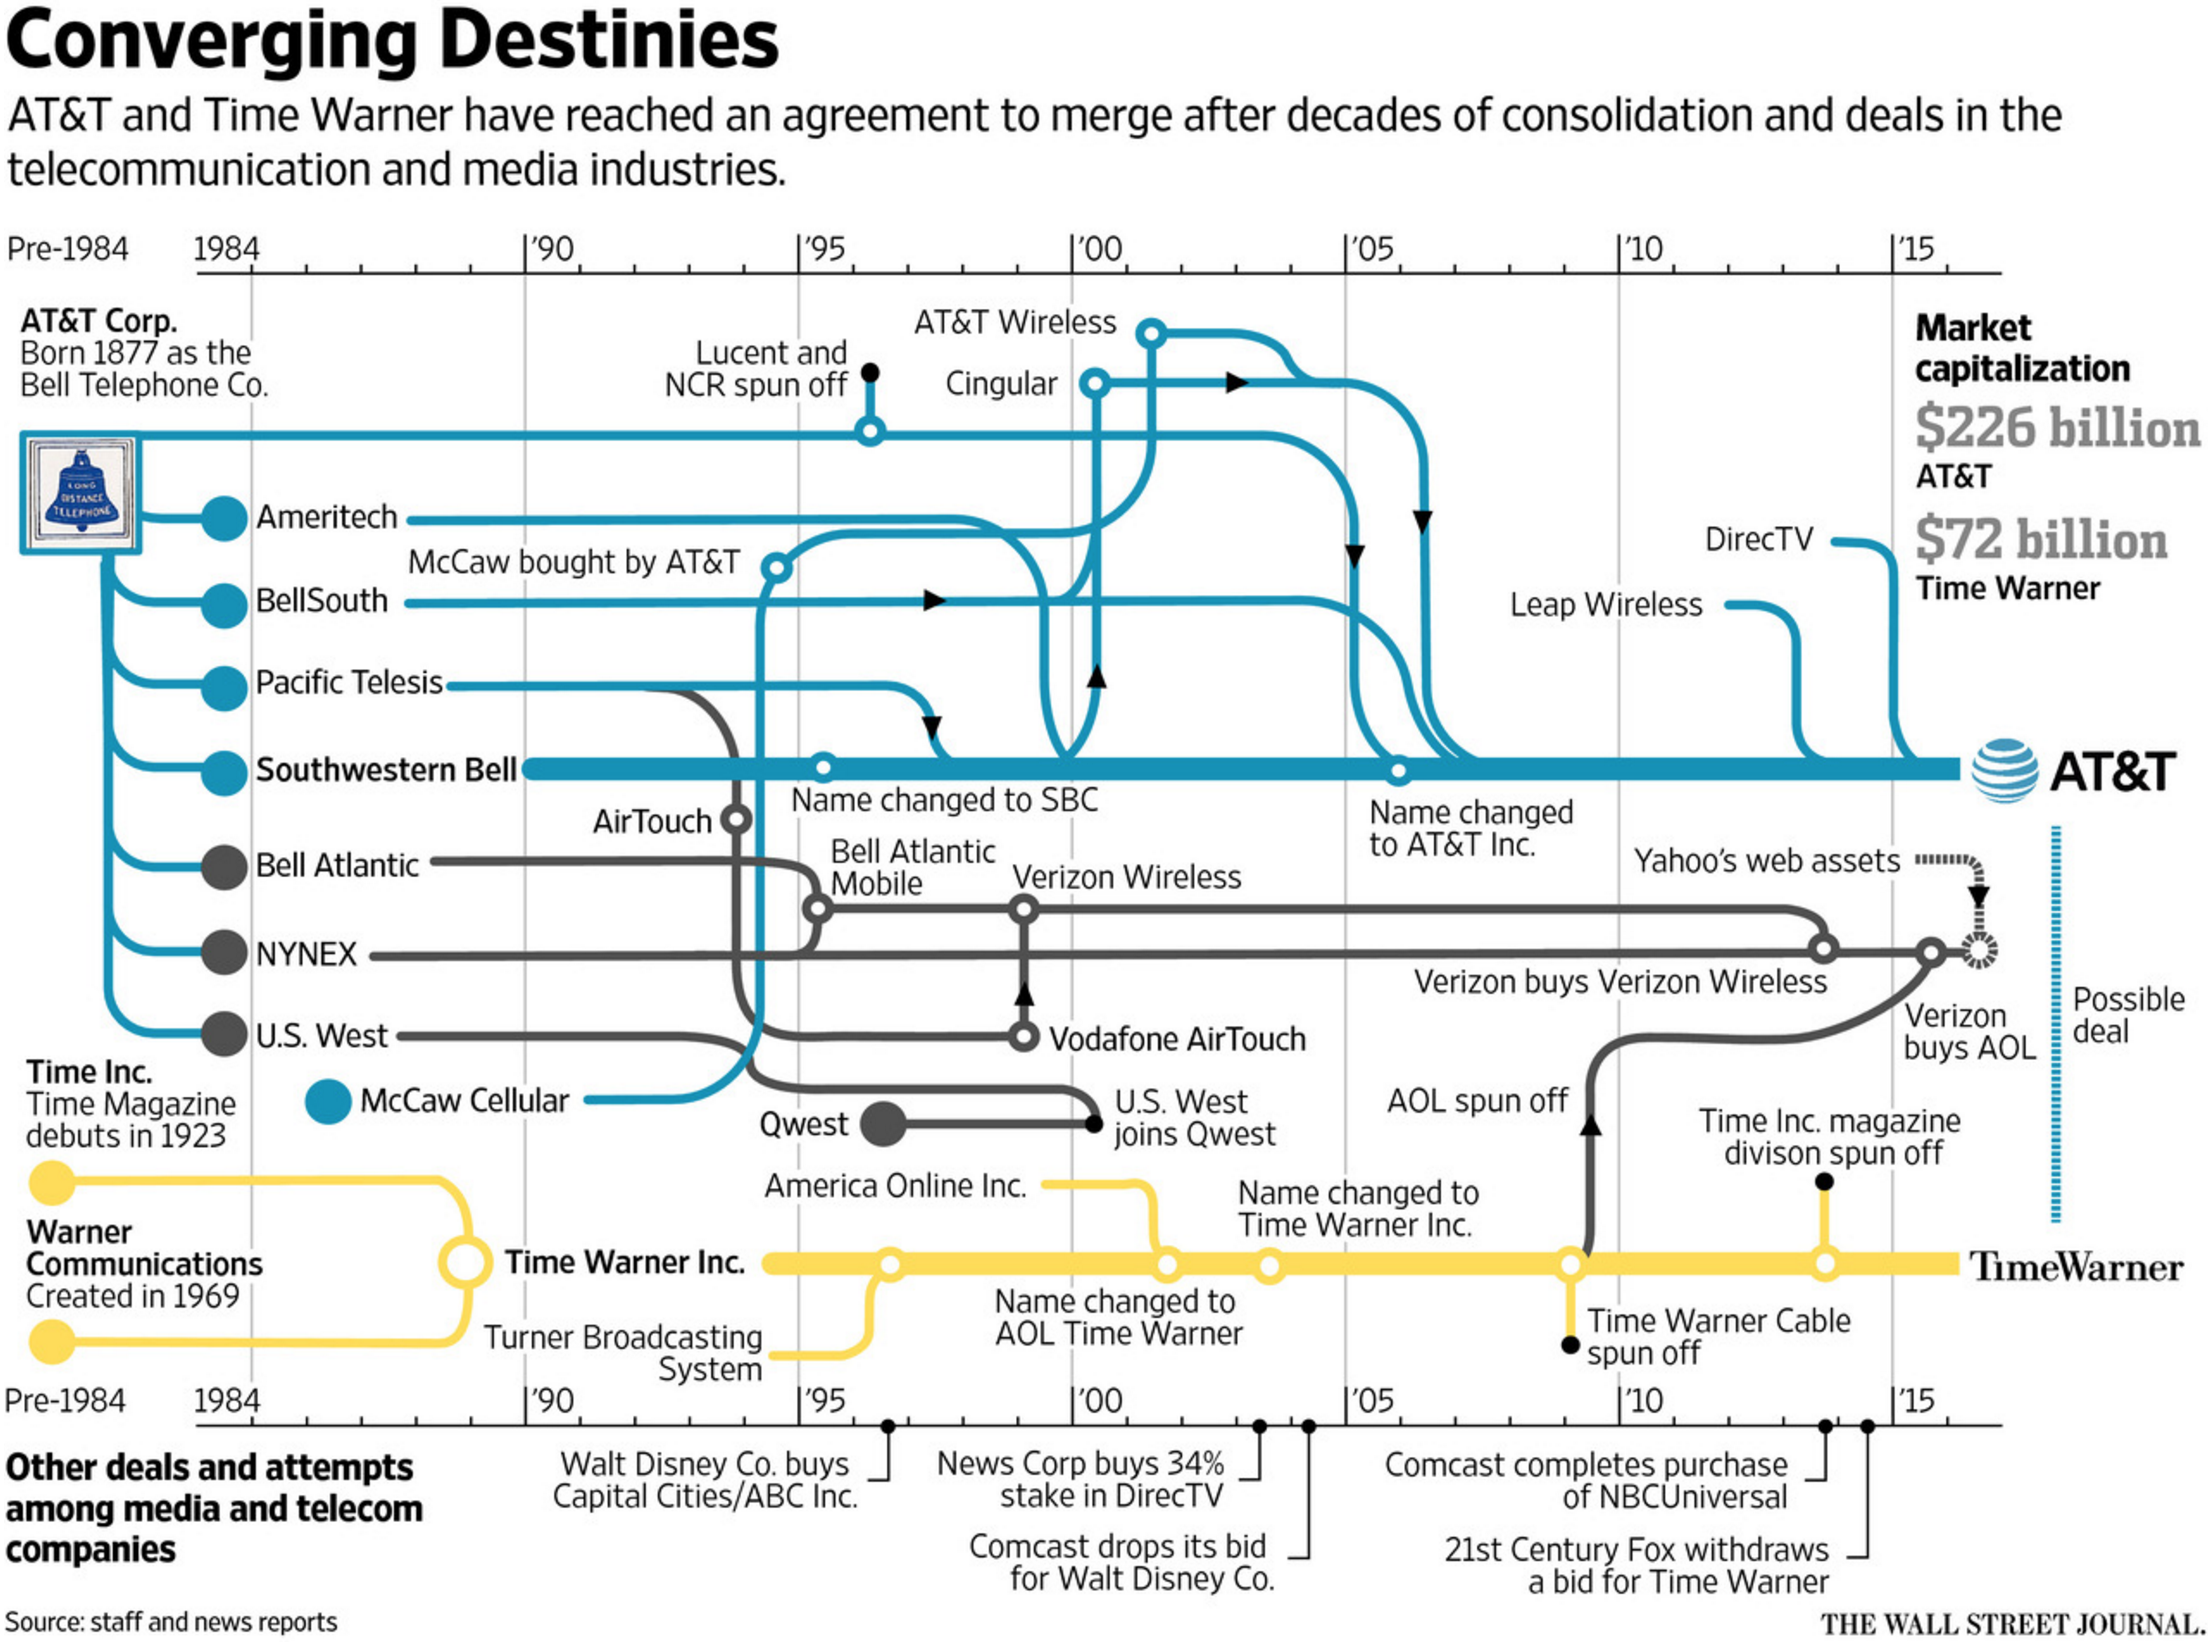 This infographic perfectly illustrates the hectic histories of AT&T and Time Warner